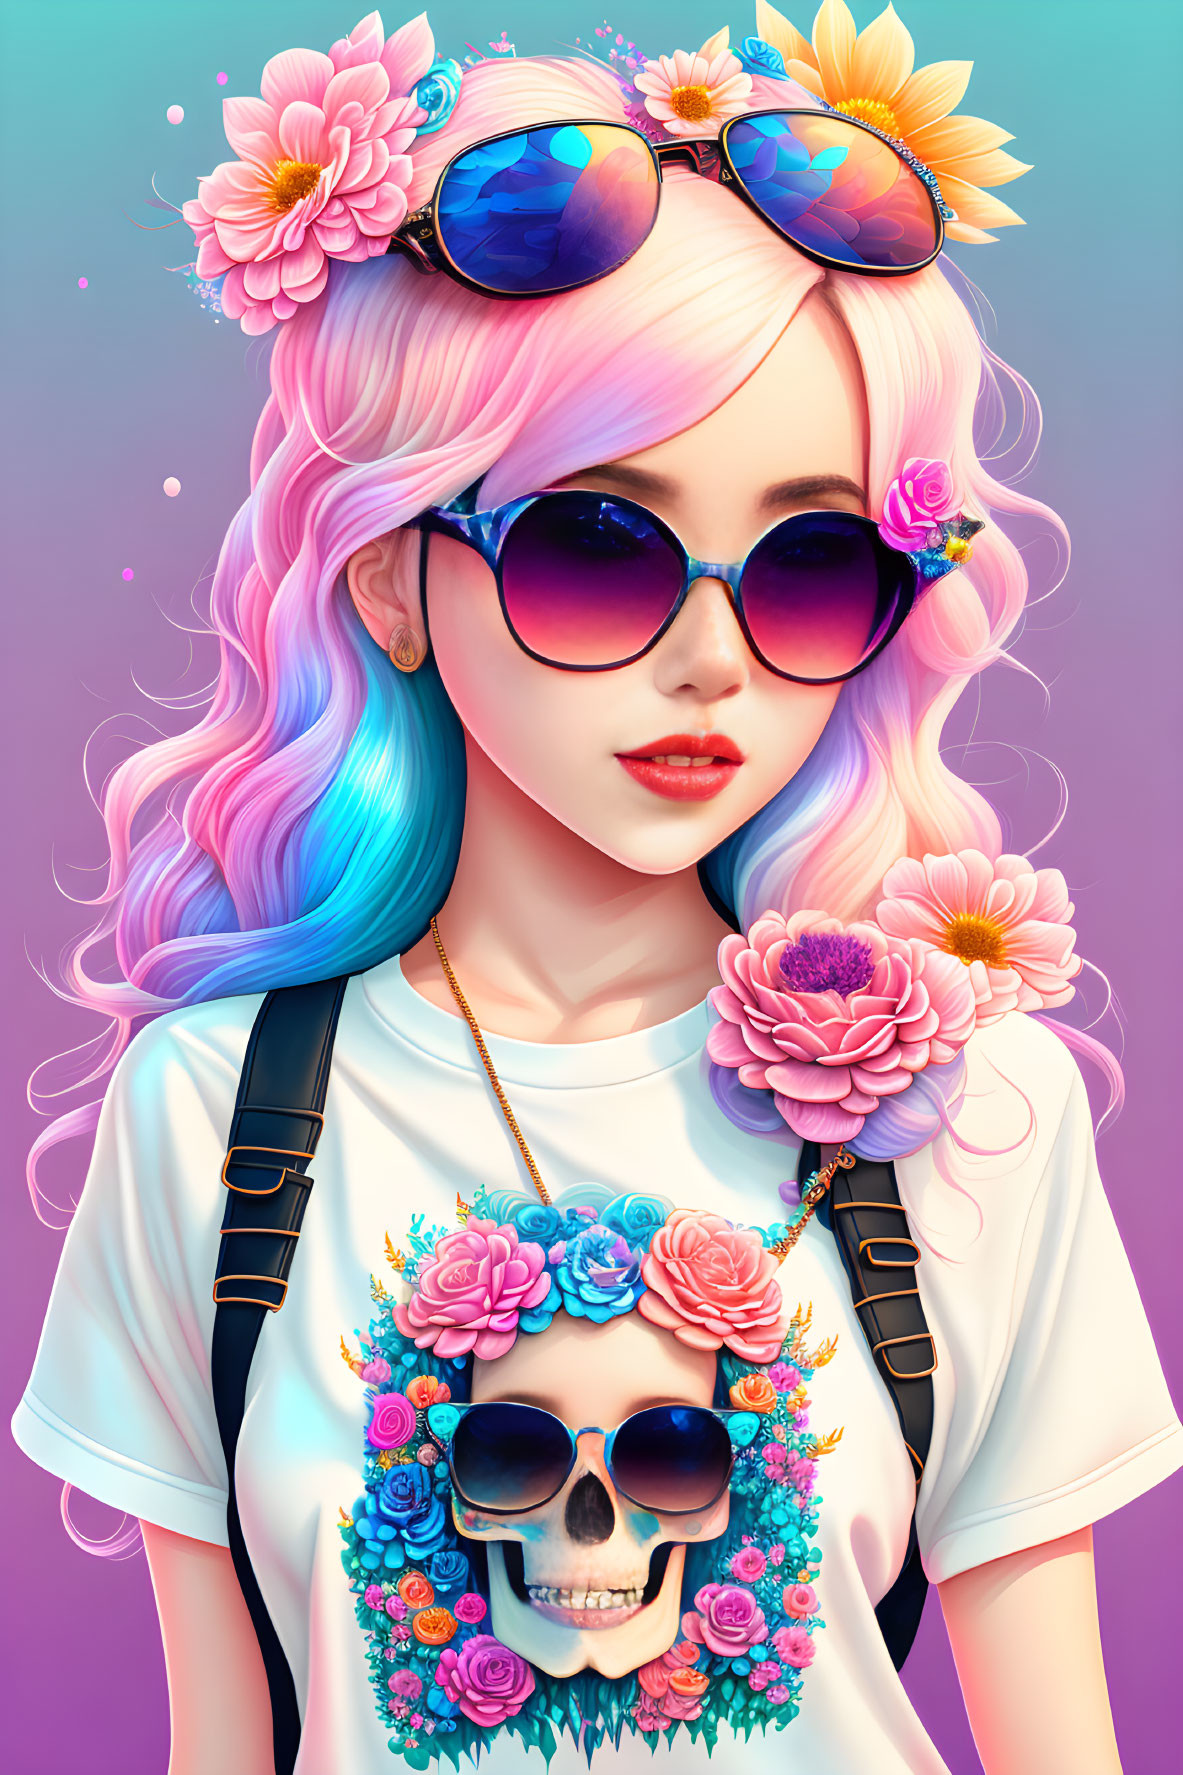 Illustration of person with pink and blue hair, floral skull t-shirt, sunglasses